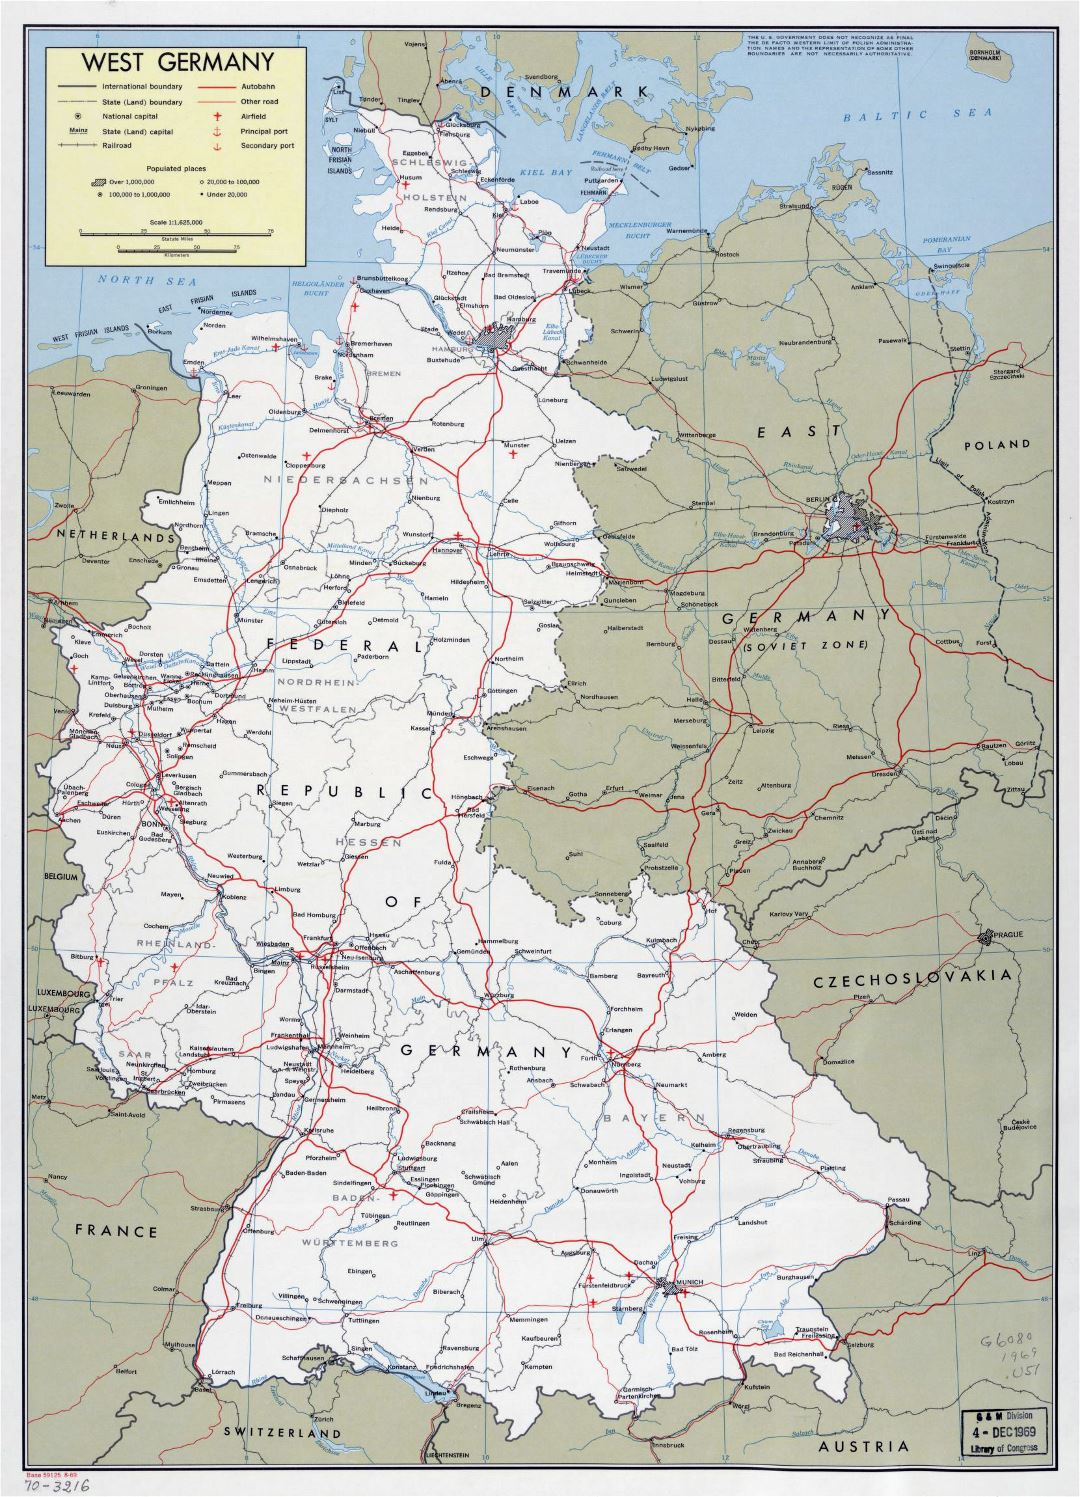 Large political and administrative map of West Germany with roads, railroads, airports, seaports and major cities - 1969